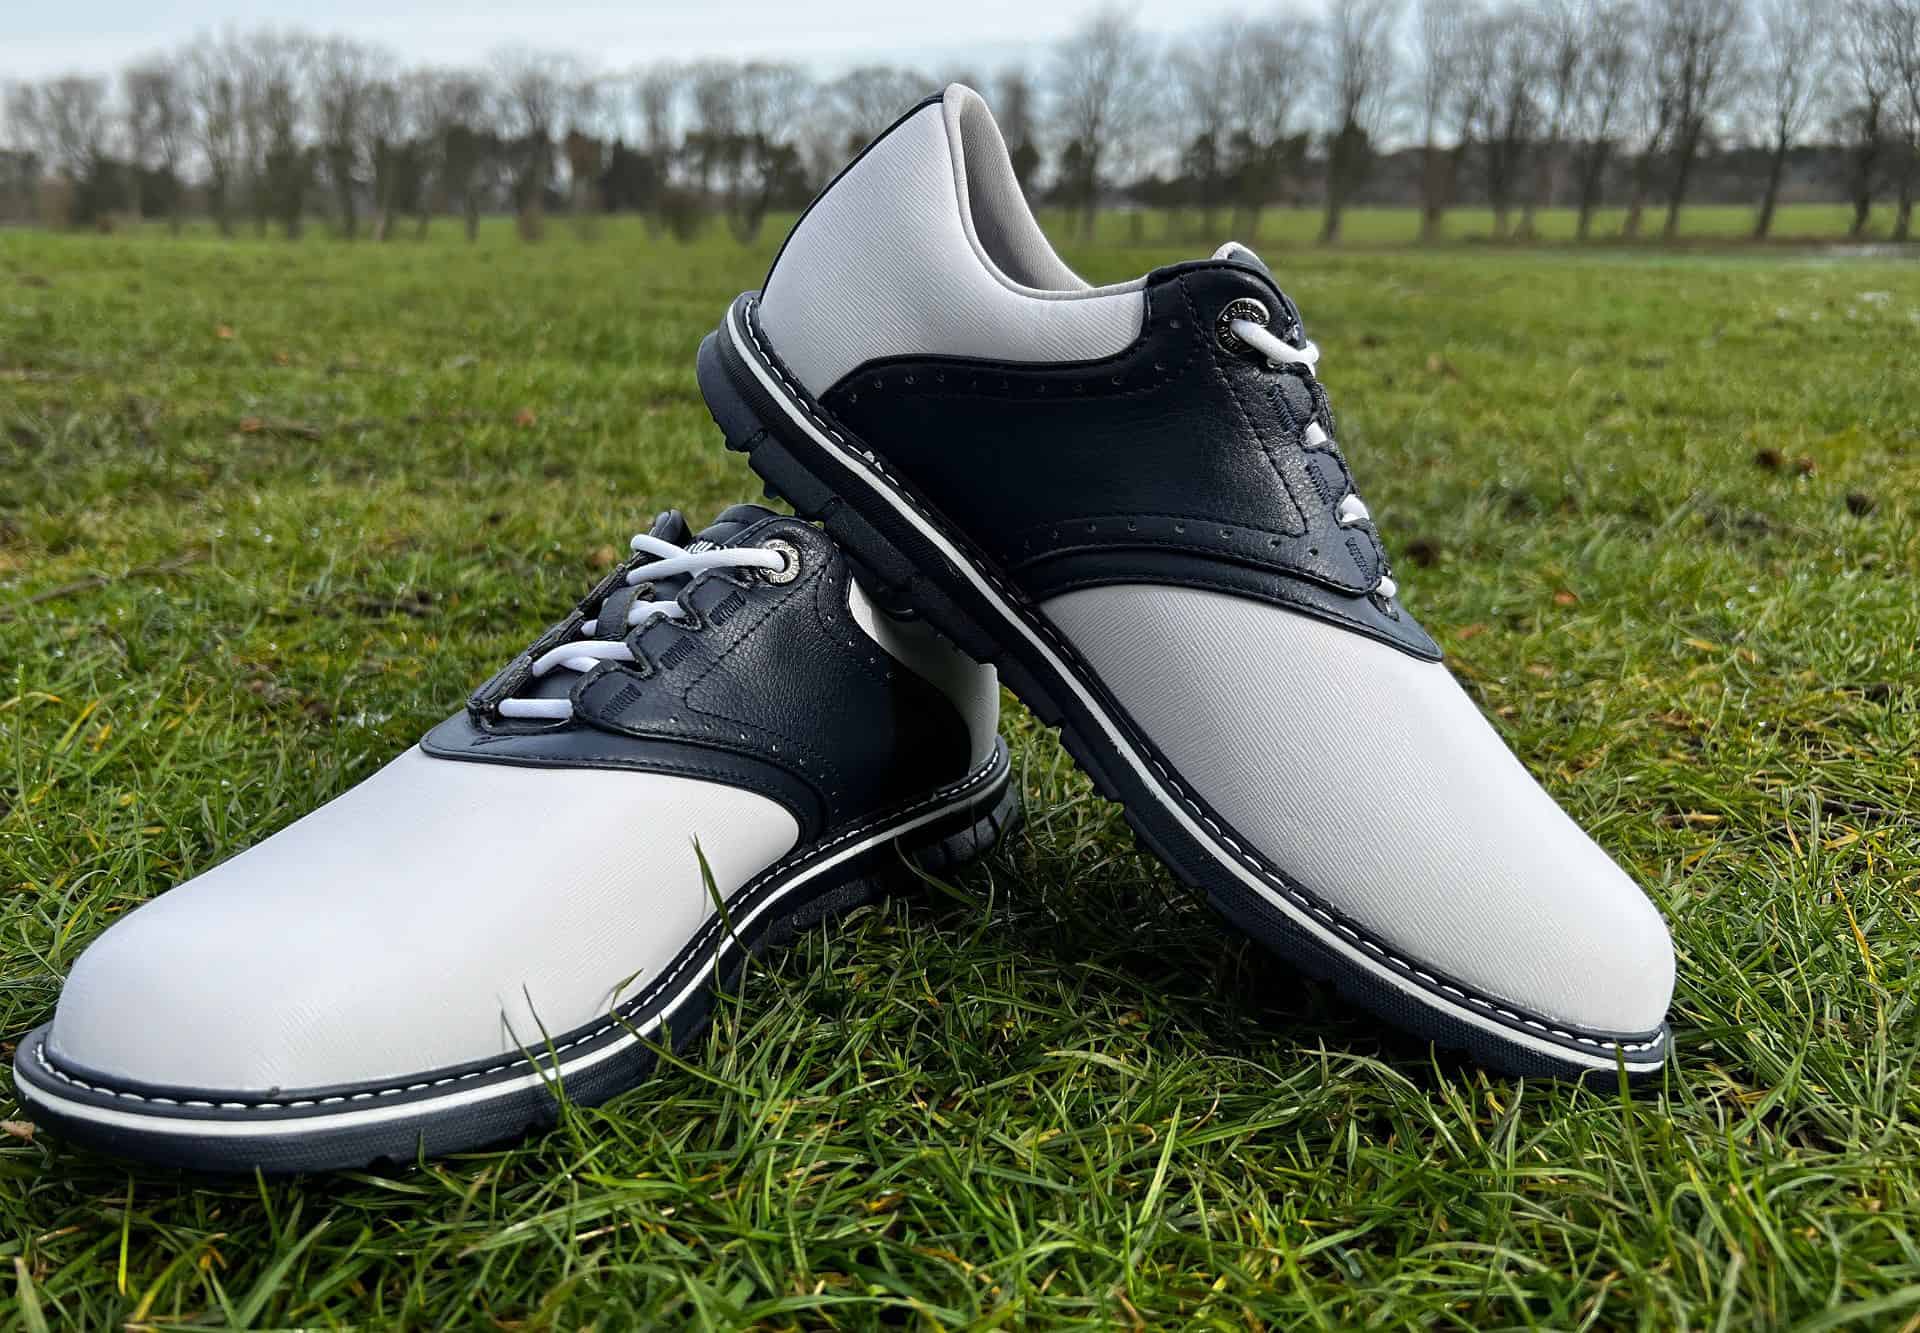 Callaway Lux Tour Series golf shoes review